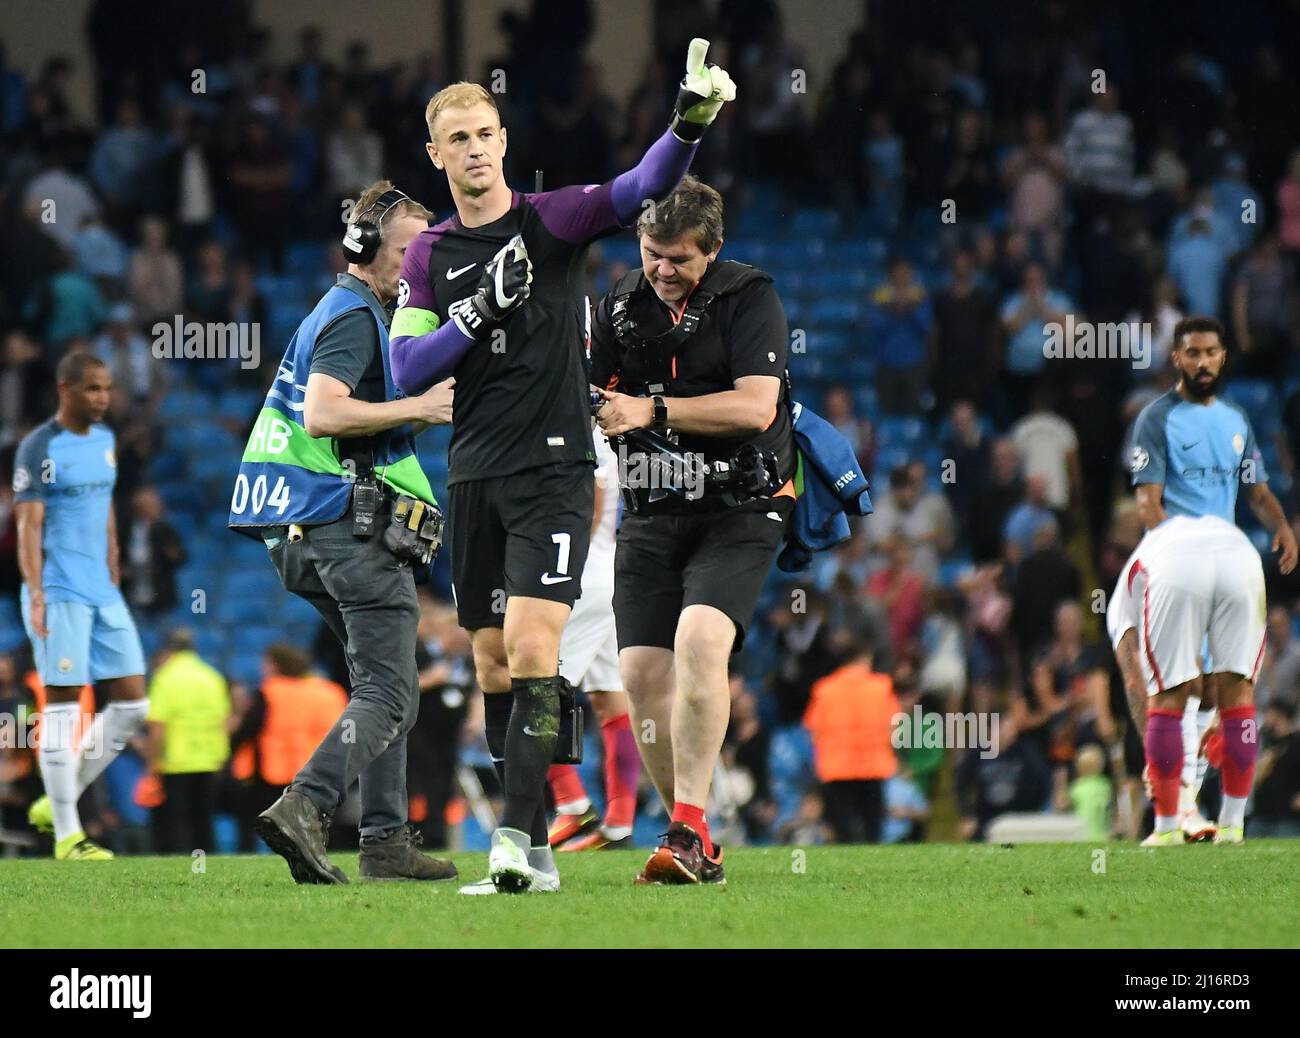 MANCHESTER, ENGLAND - AUGUST 24, 2016: Joe Hart of City thanking the fans after the second leg of the 2016/17 UEFA Champions League tie between Manchester City (Engalnd) and FCSB (Romania) at Etihad Stadium. Copyright: Cosmin Iftode/Picstaff Stock Photo